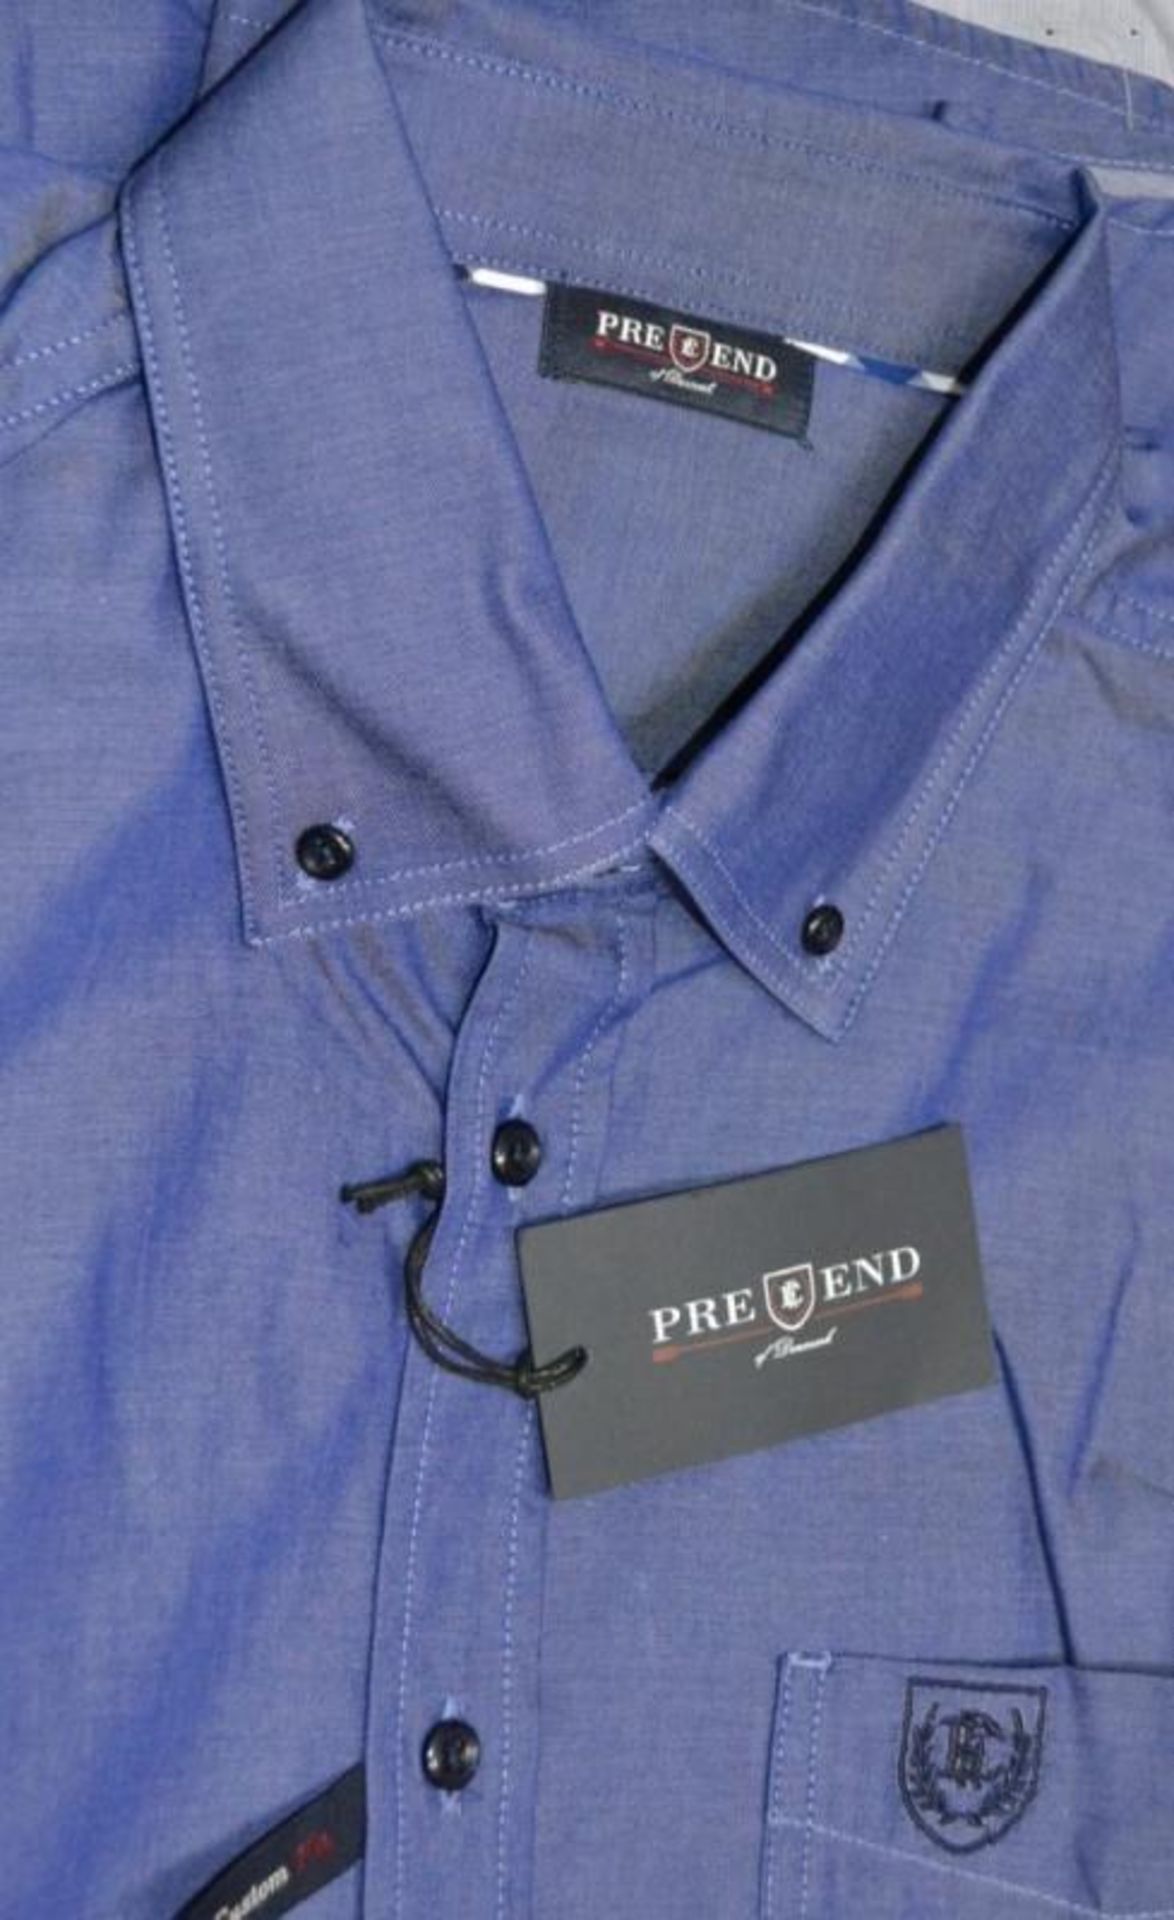 4 x Assorted Pre End Mens Shirts - Various Styles - Suitable For Evenings Out Or To Wear In The Offi - Image 5 of 6